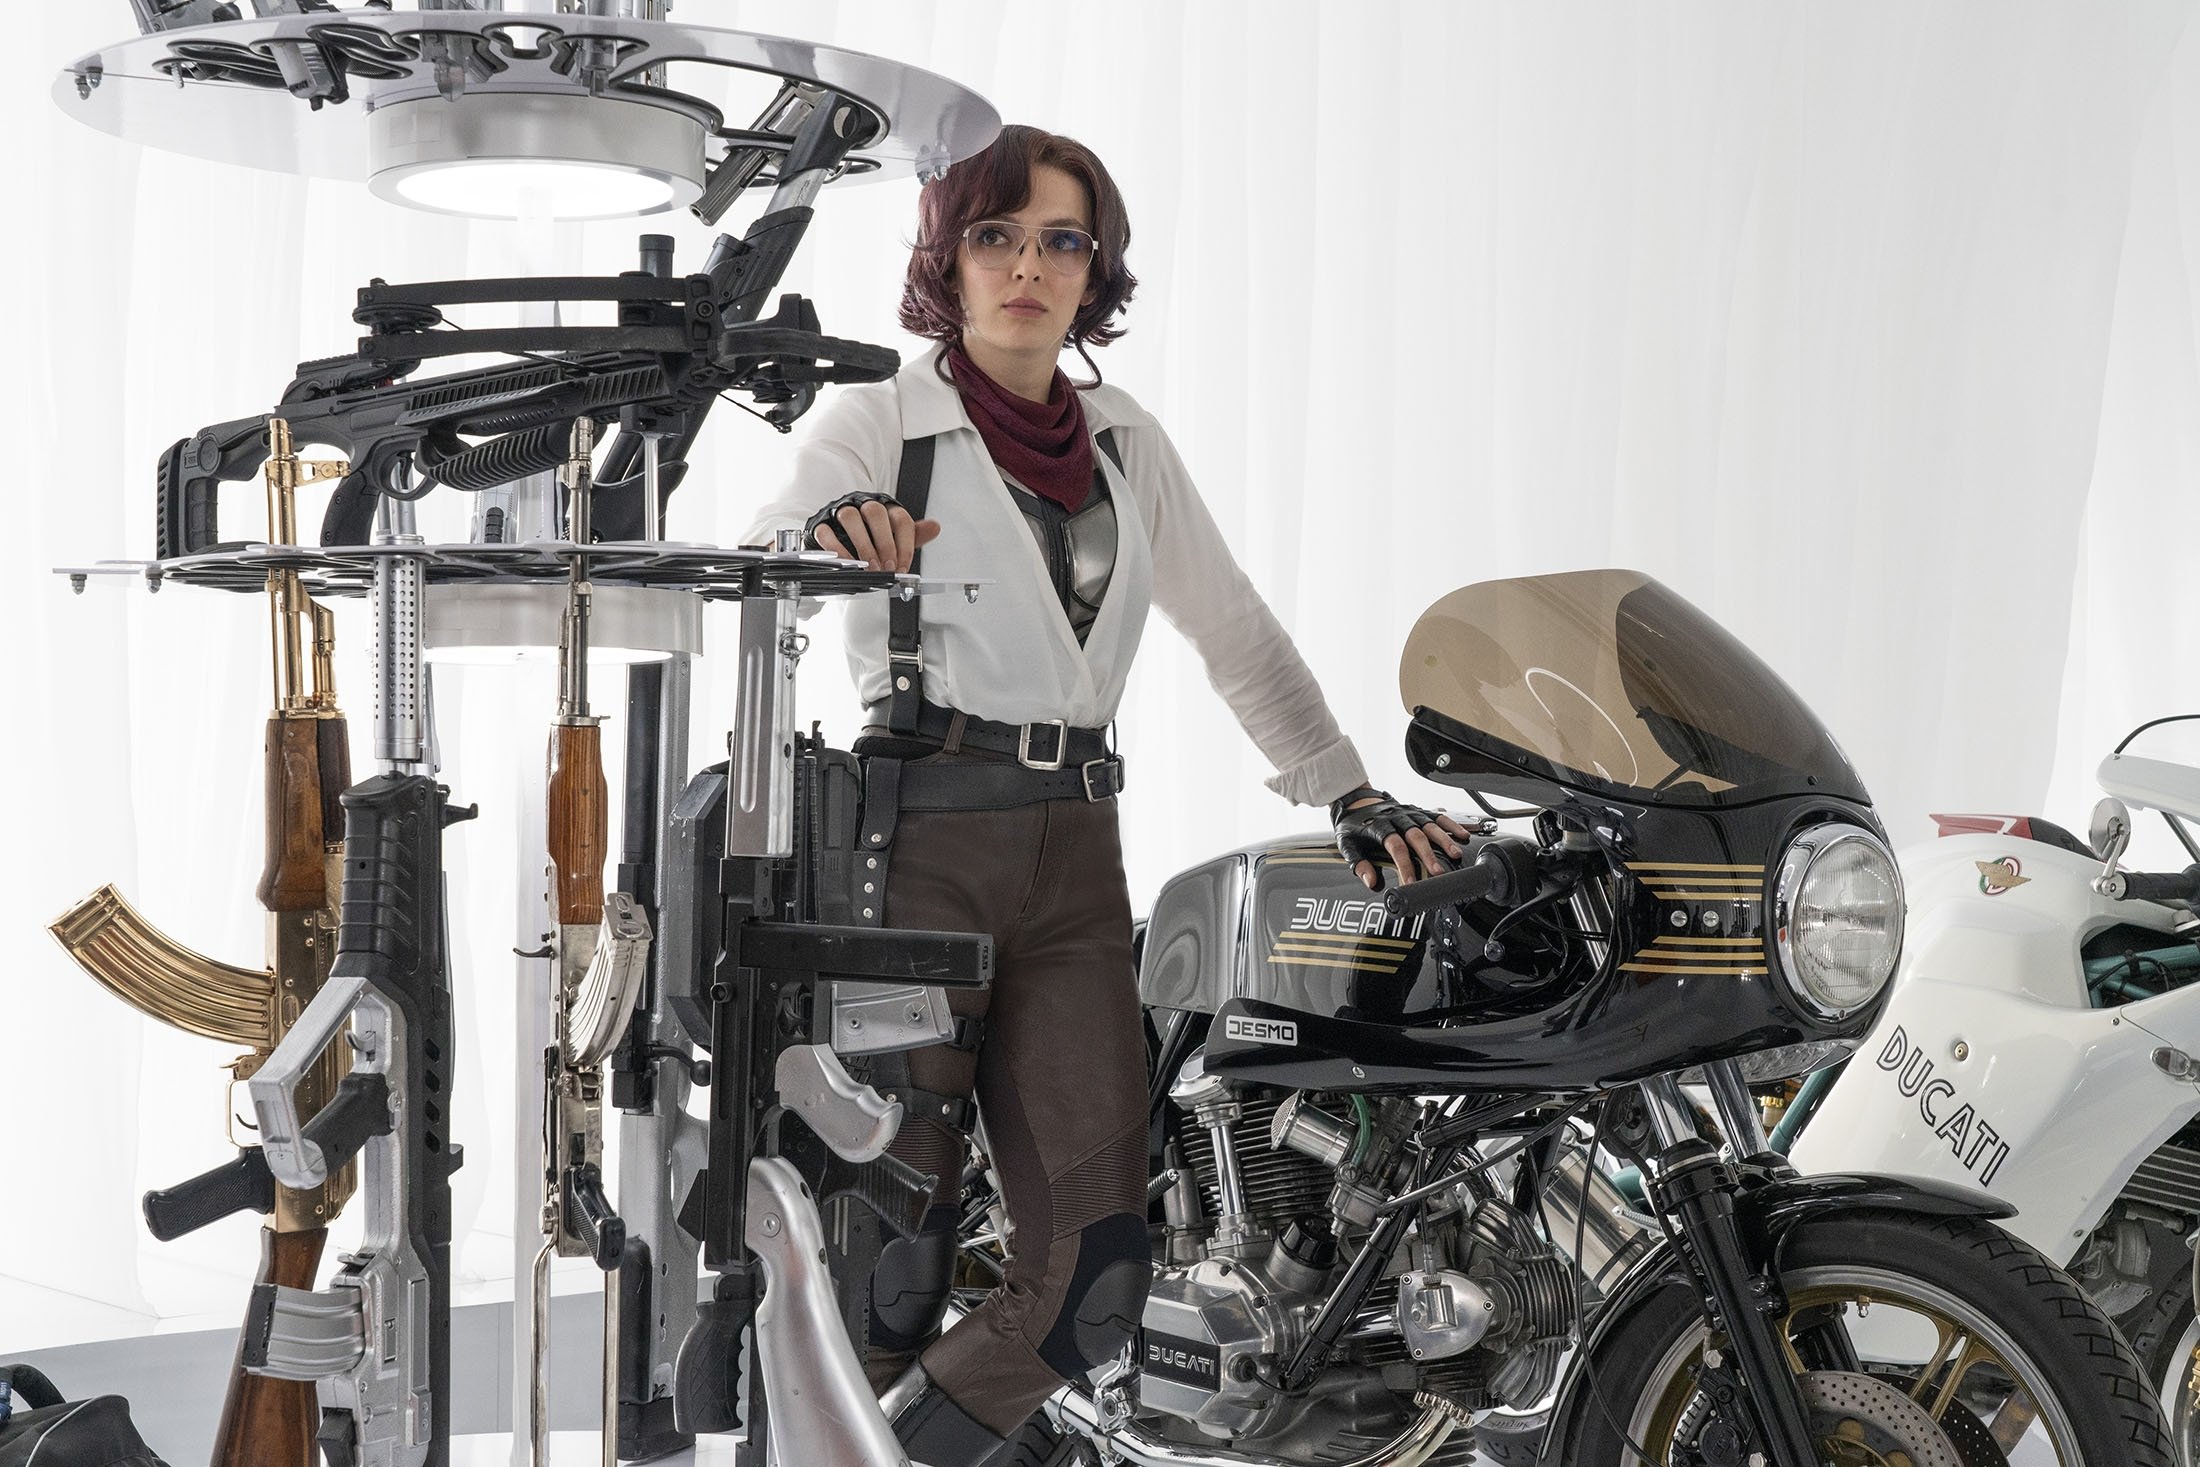 Jodie Comer leans against a motorcycle surrounded by weapons in a warehouse in a scene from the film "Free Guy." (20th Century Studios via AP)